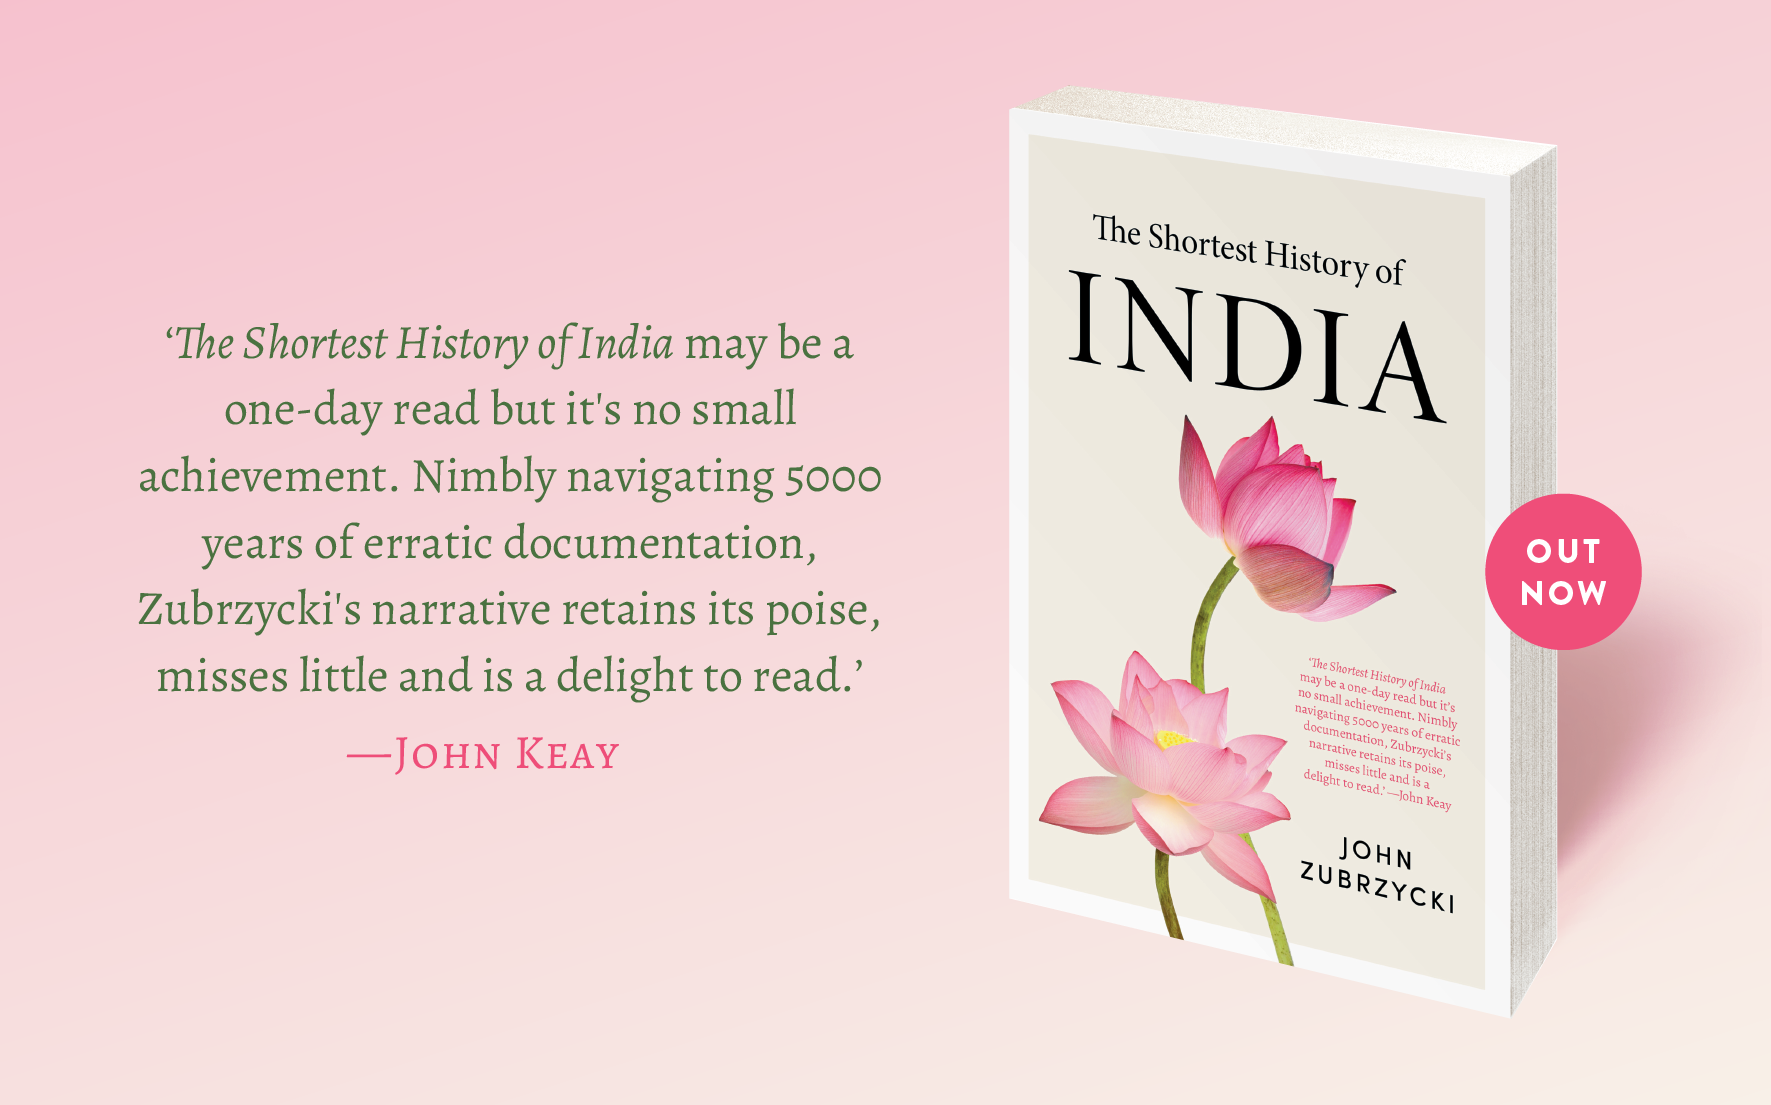 Out Now: The Shortest History of India 